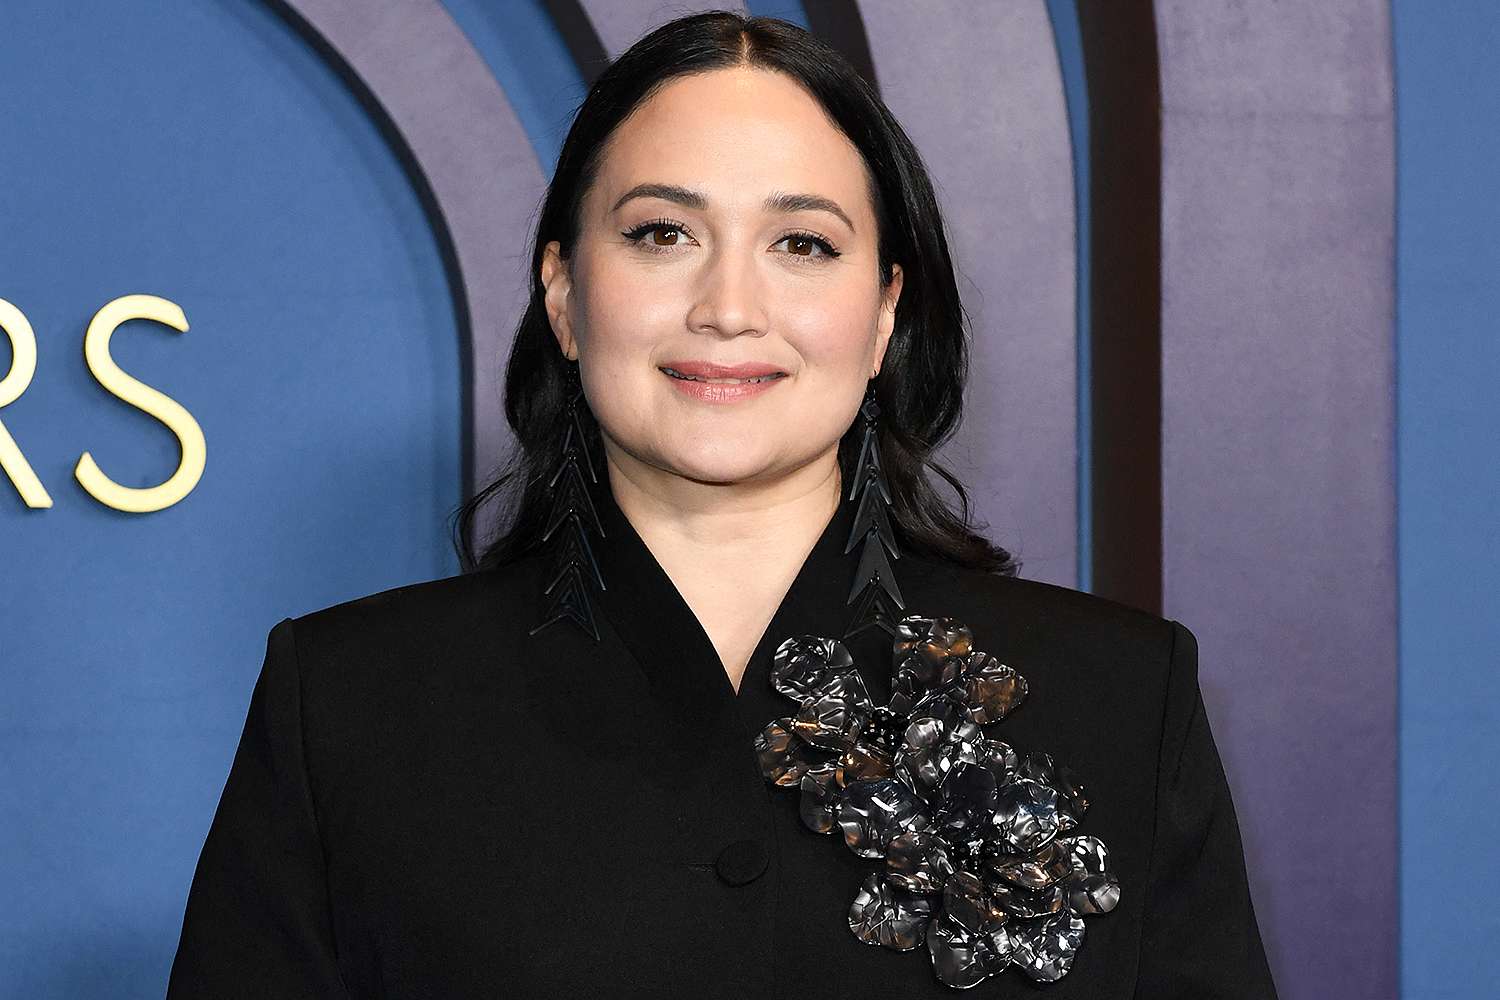 lily gladstone references super bowl while talking native american 'misrepresentation': 'look at one of the teams playing'